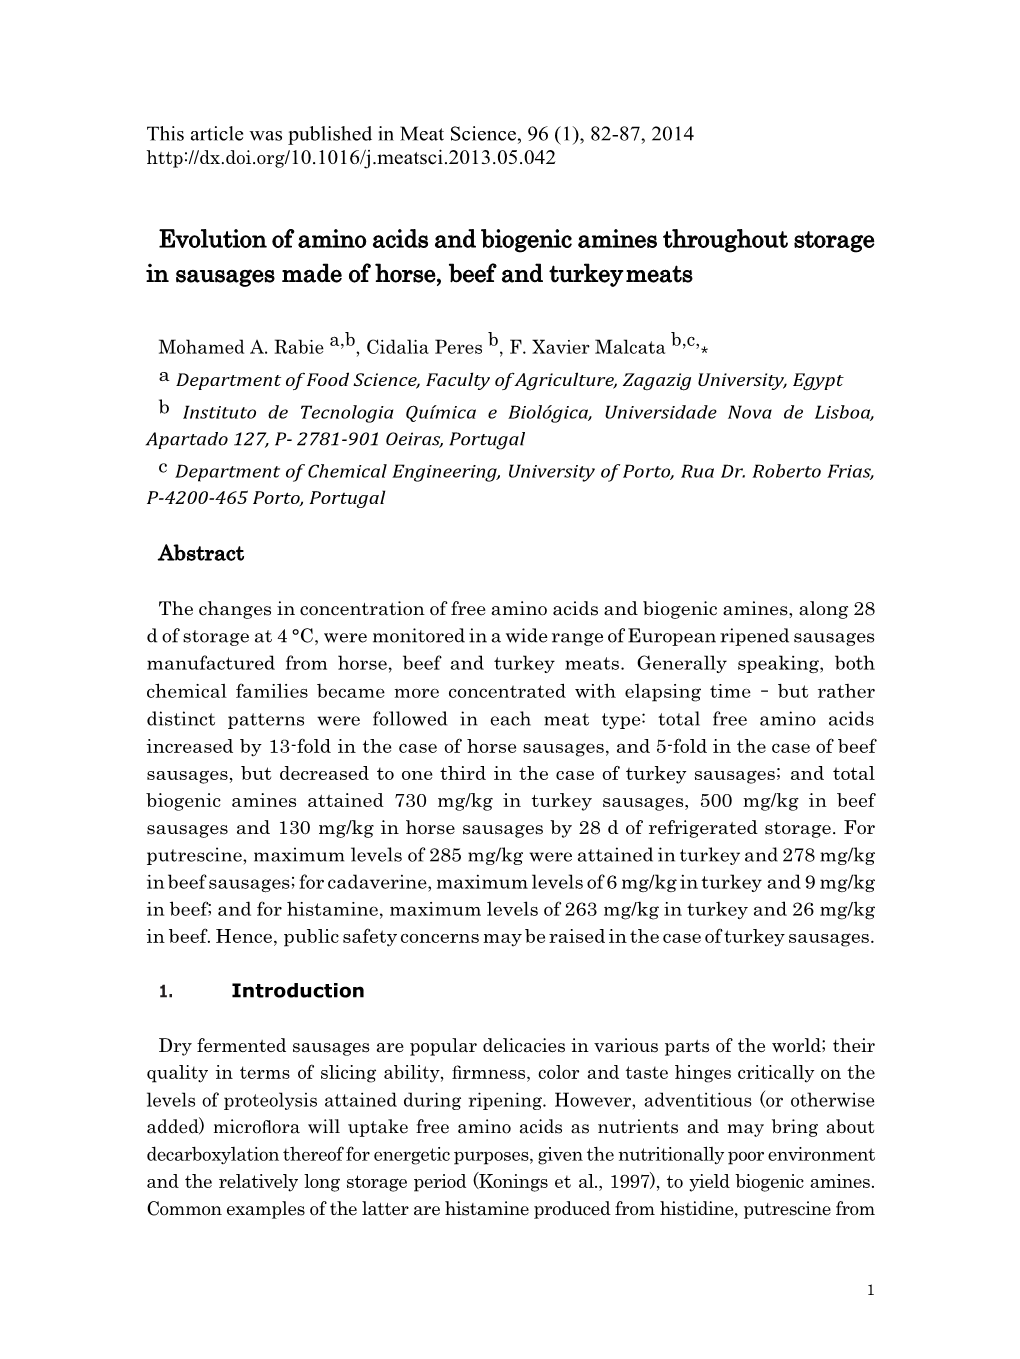 Evolution of Amino Acids and Biogenic Amines Throughout Storage in Sausages Made of Horse, Beef and Turkey Meats